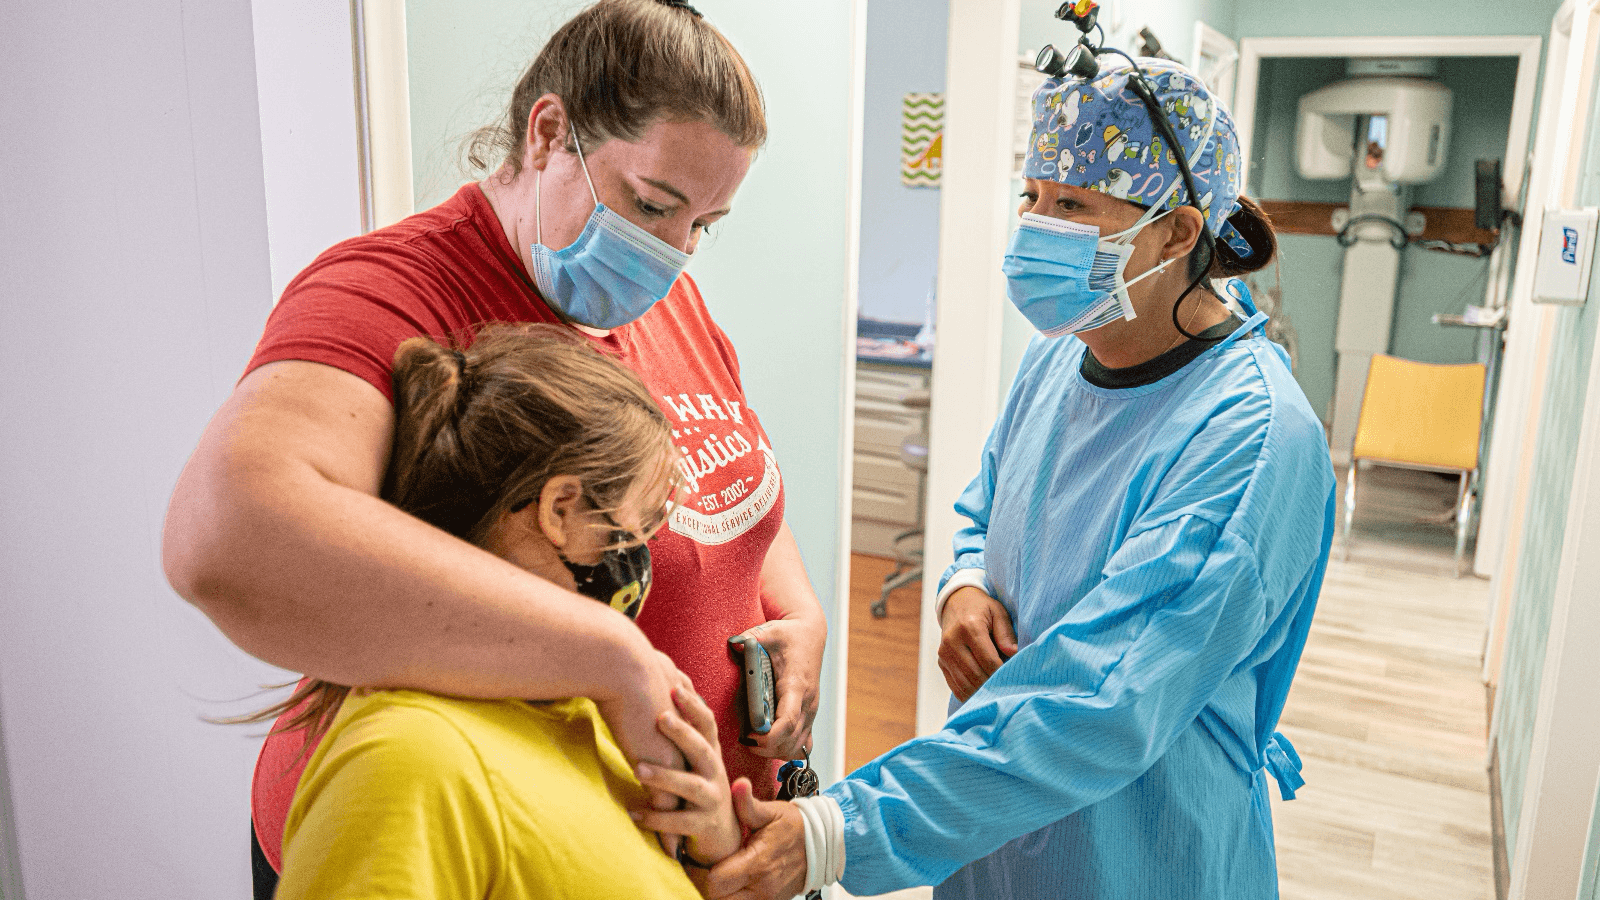 Dental clinic’s 10th anniversary and Giving Tuesday provide opportunity to give back